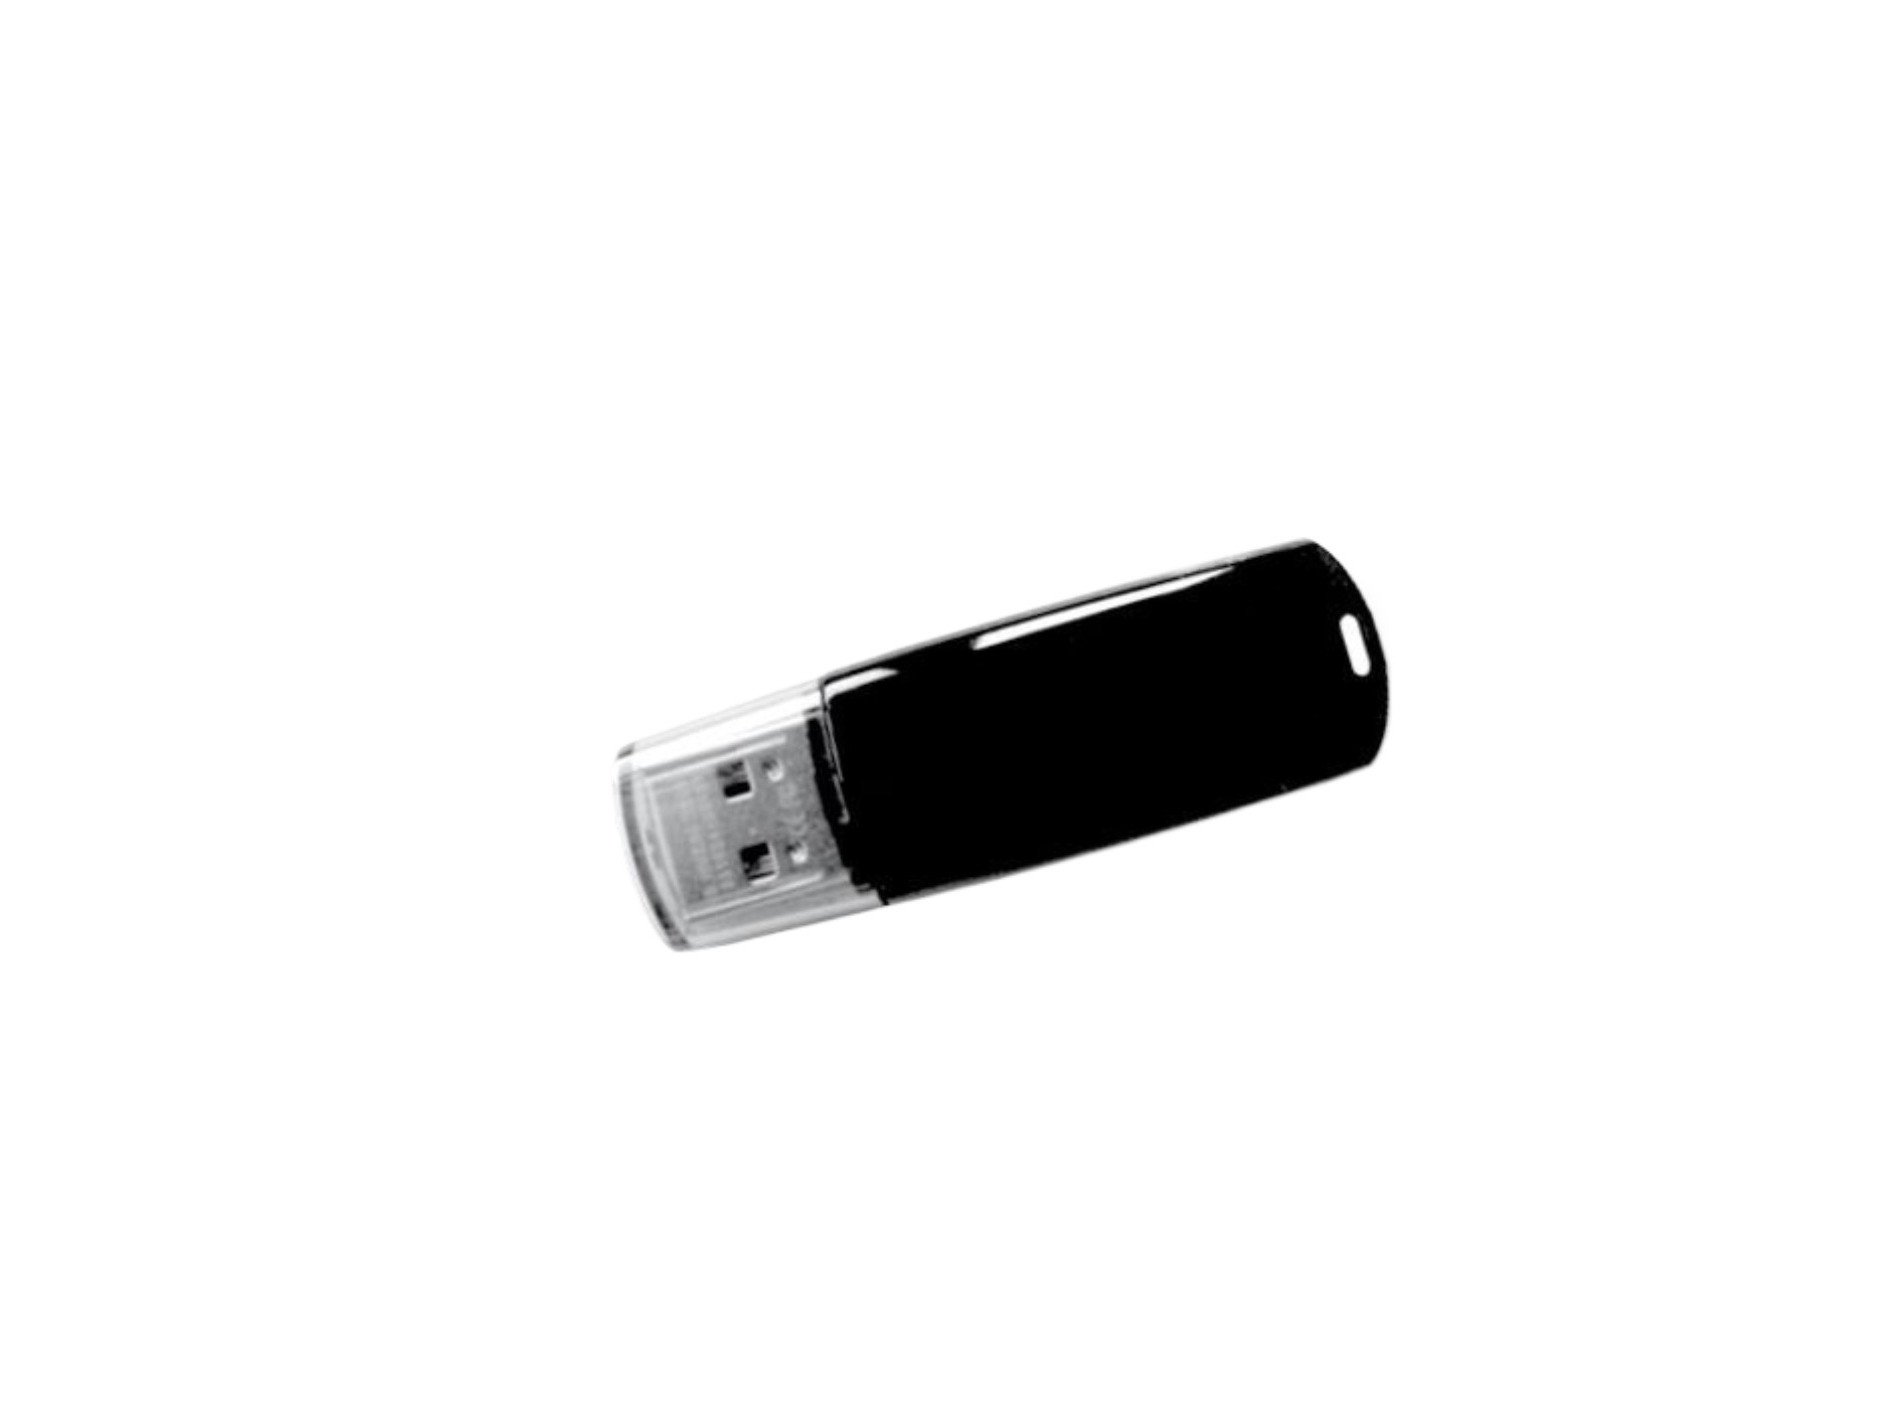 Ketron Pendrive 2012 SOUND UPGRADE Vol.2 - flash drive with additional AUDYA styles